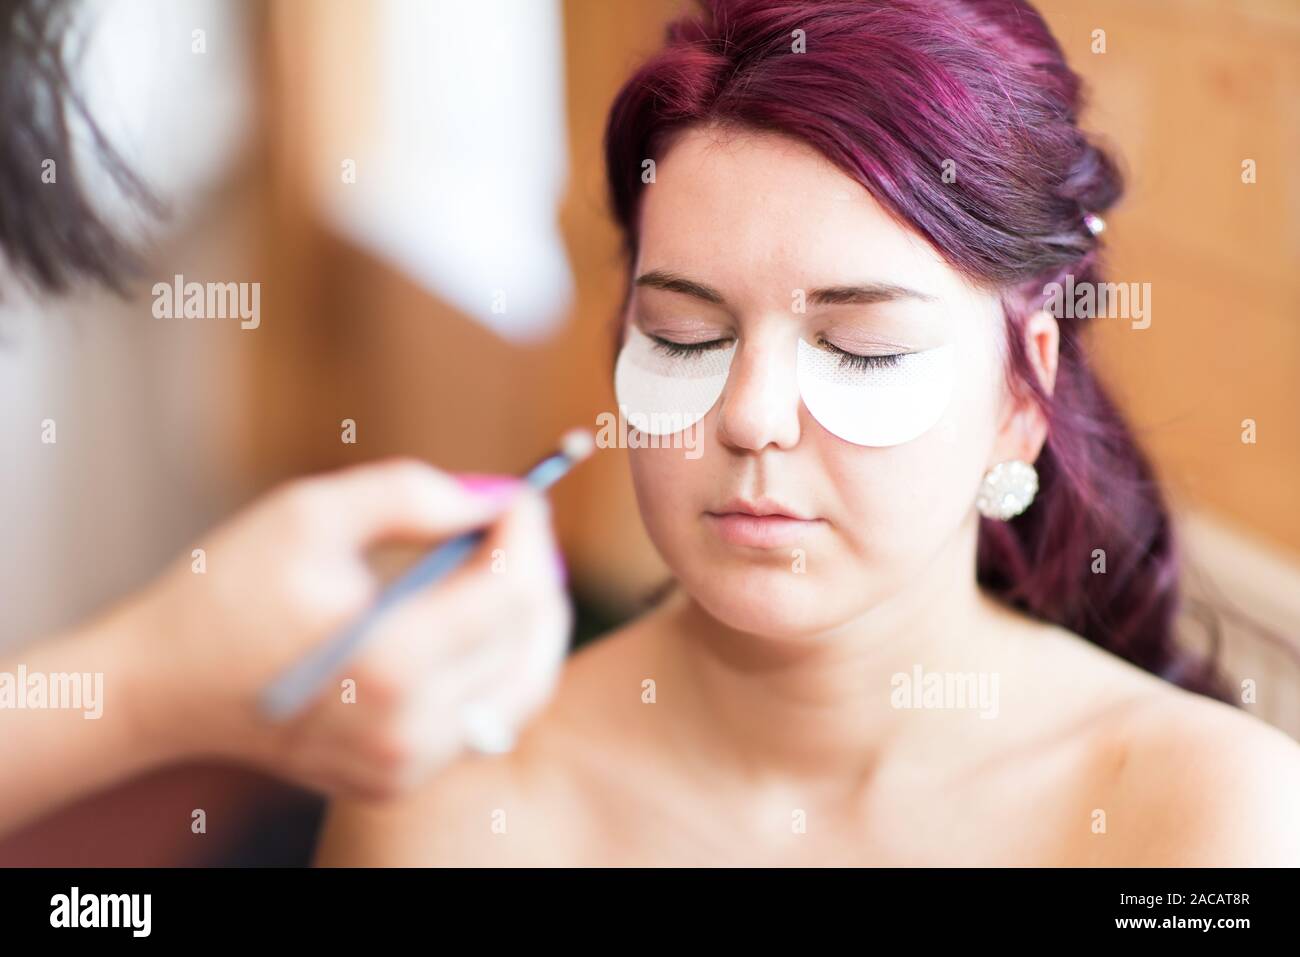 A beautiful bride to be getting ready during bridal prep, preparation hours before the marriage ceremony, excited for the big day ahead Stock Photo